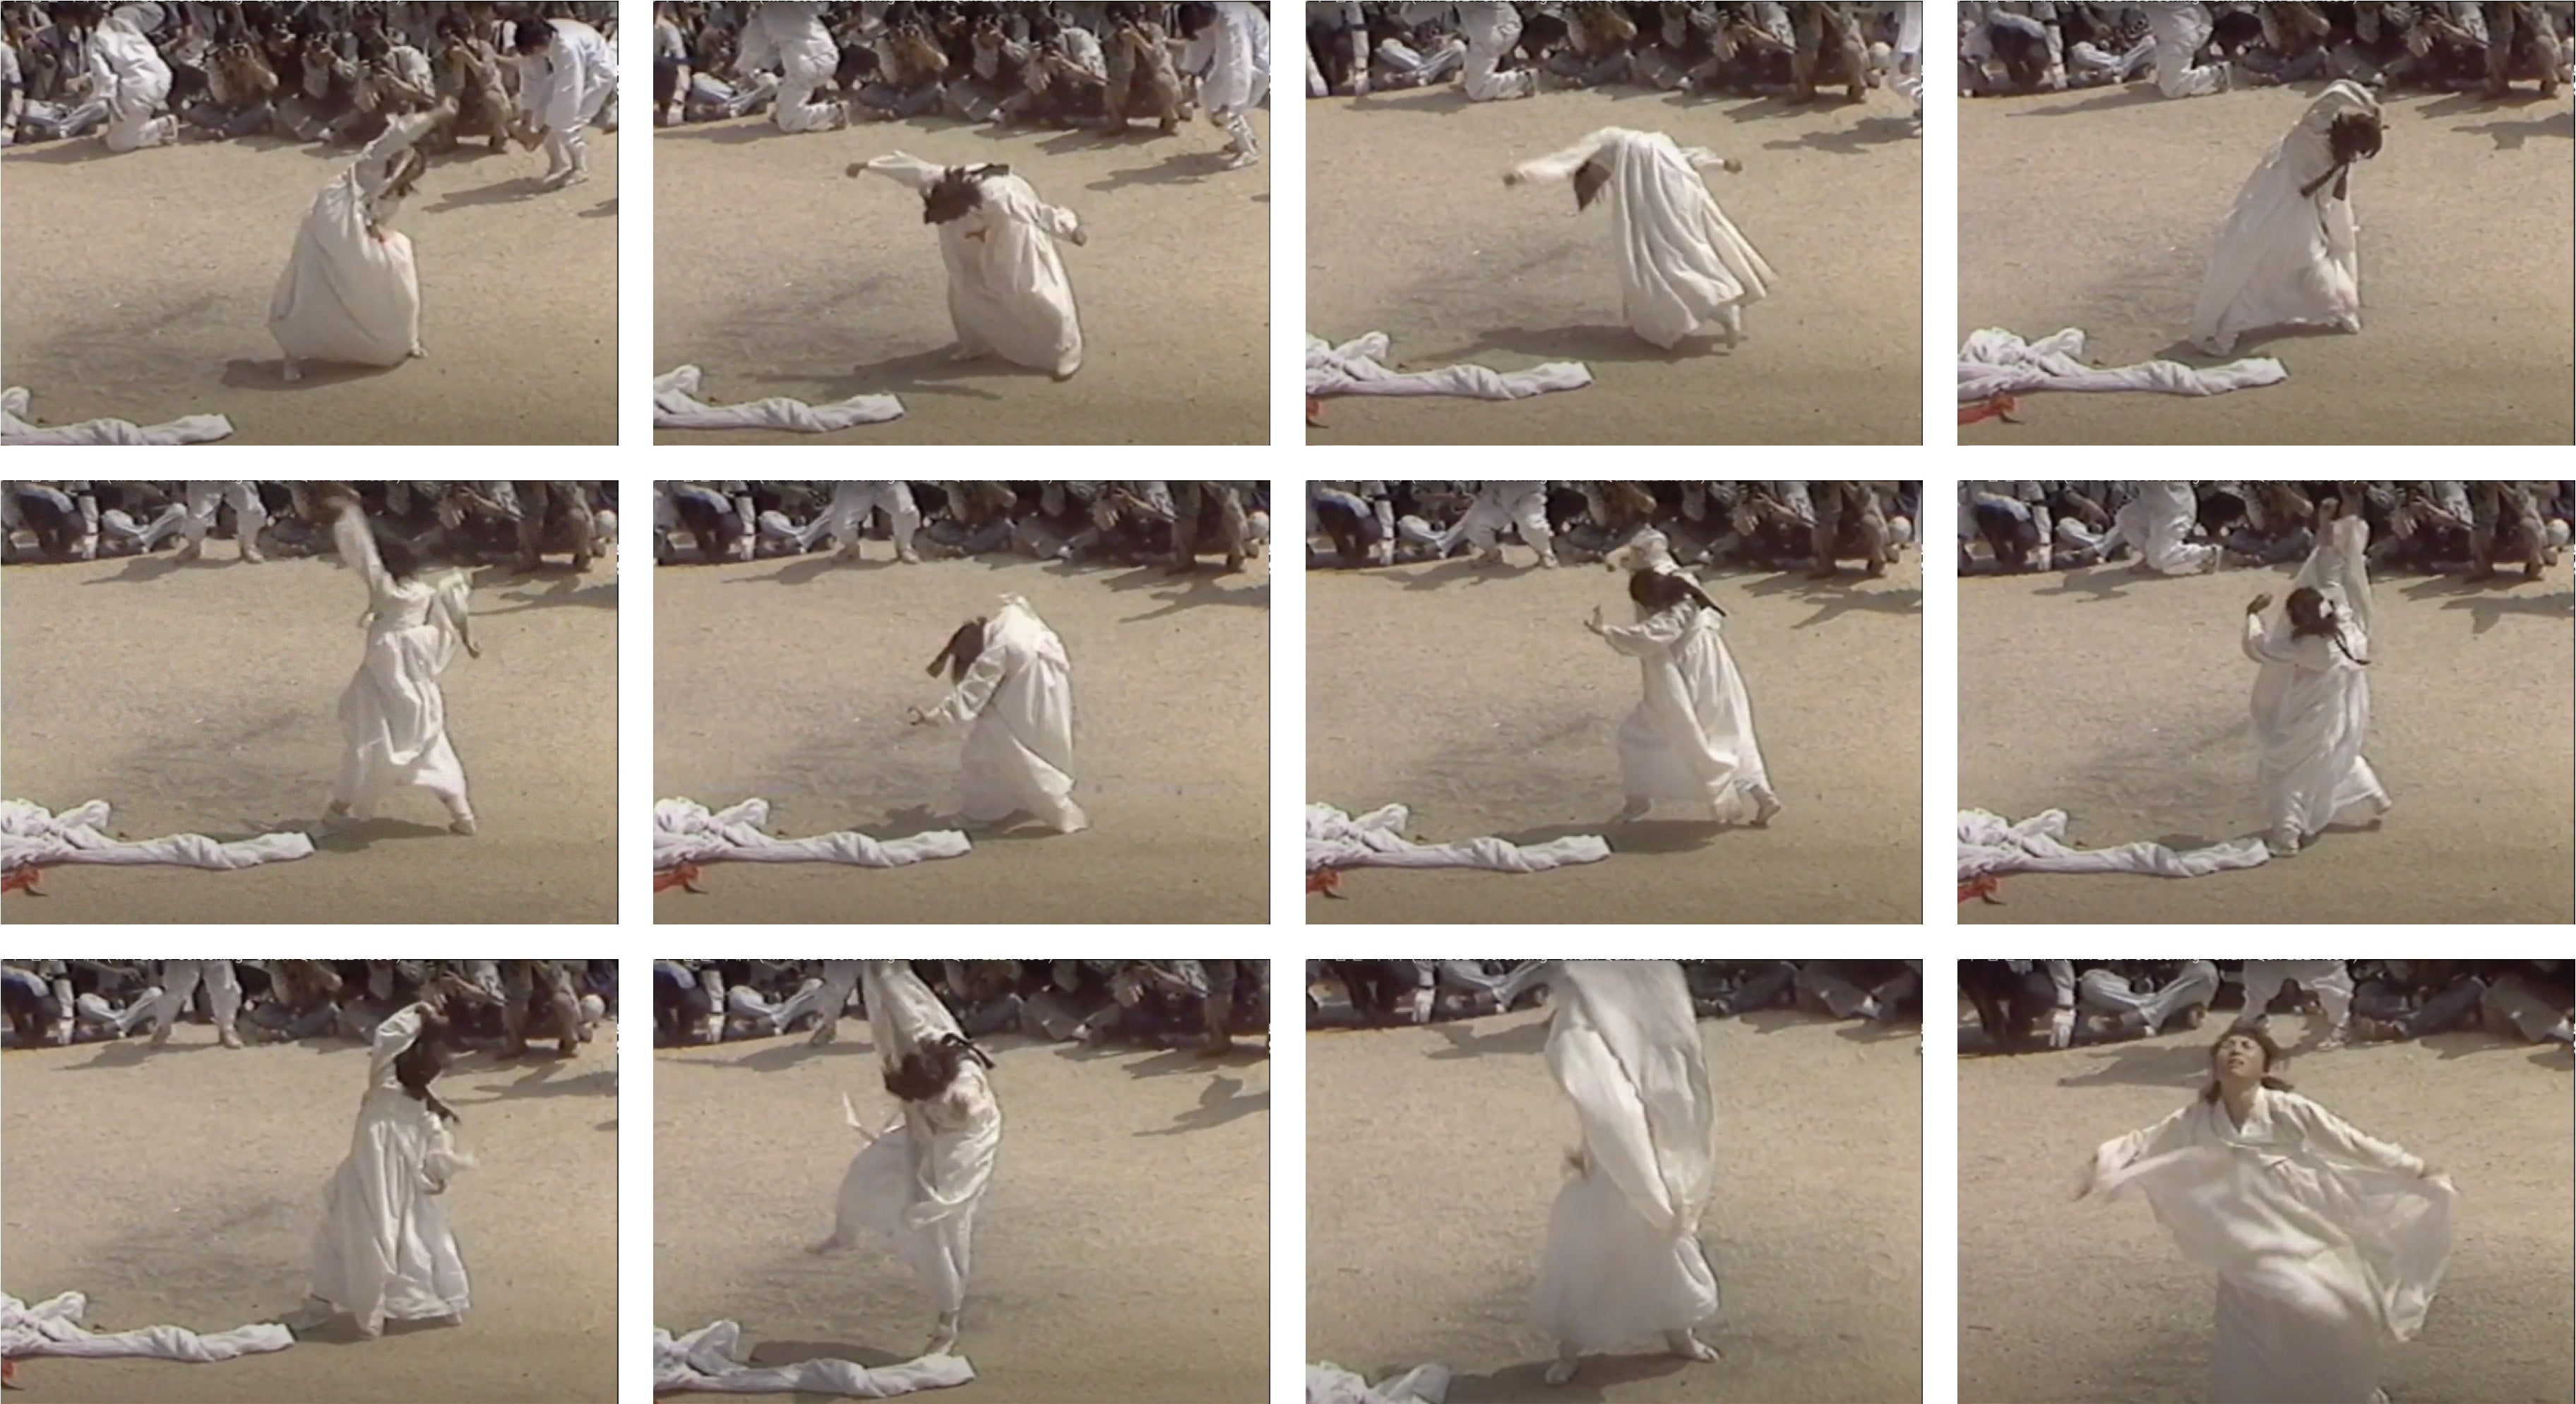 Lee Ae-ju, expert in Korean dance, dances for a student vigil during 1987 democracy protests in Seoul, South Korea